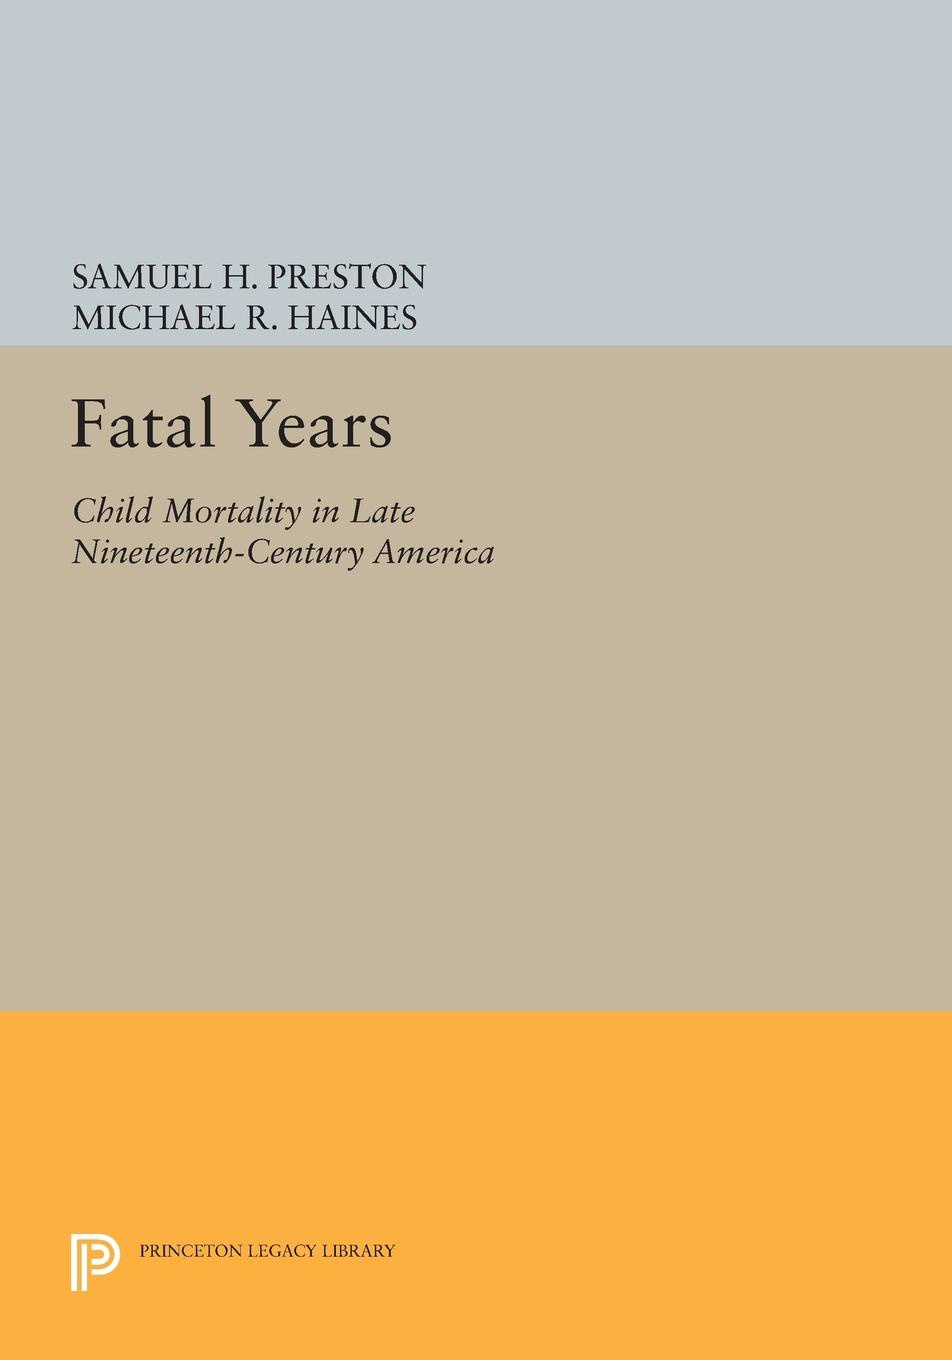 Fatal Years. Child Mortality in Late Nineteenth-Century America